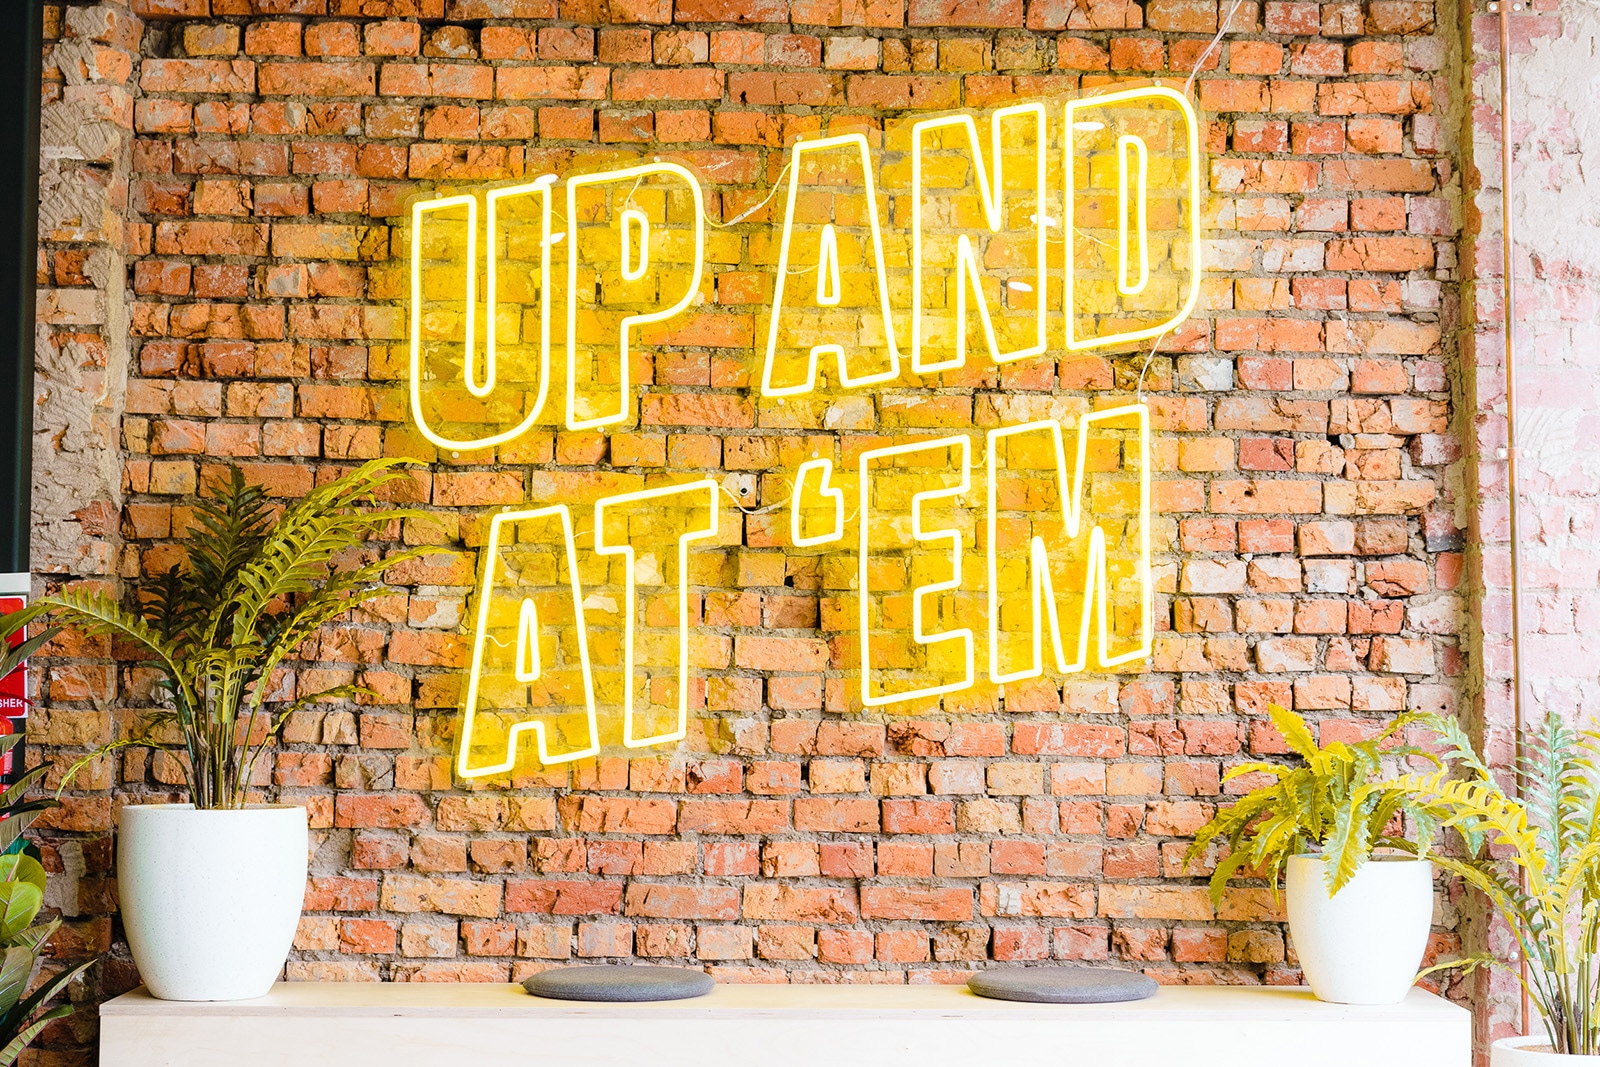 A bright yellow neon sign stands out boldly from the brick wall behind. The sign reads Up and at 'em.